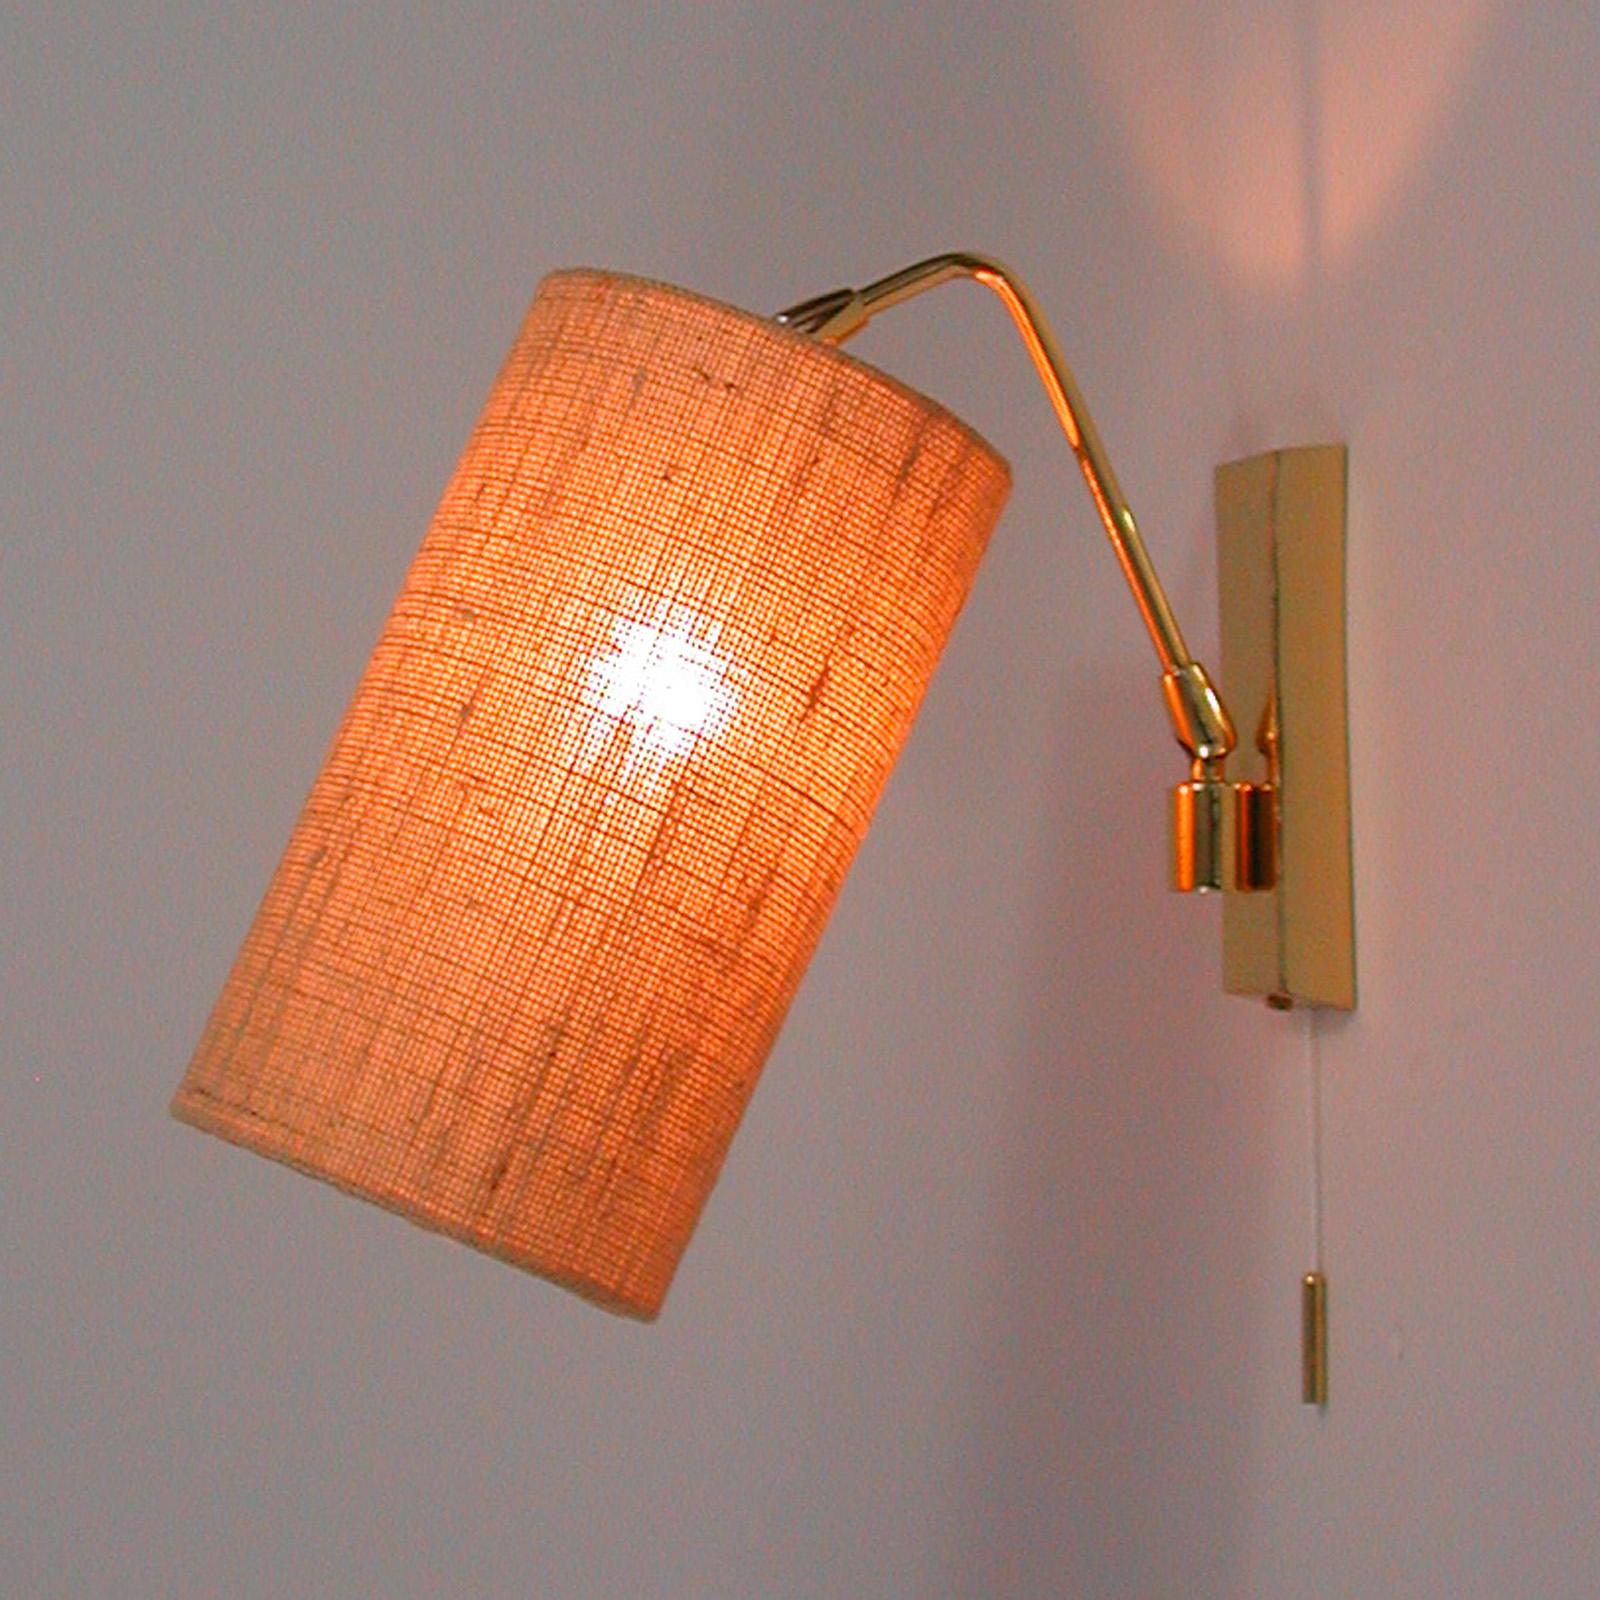 Midcentury Brass and Sisal Adjustable Sconce, Kalmar Attributed., Austria, 1960s For Sale 10